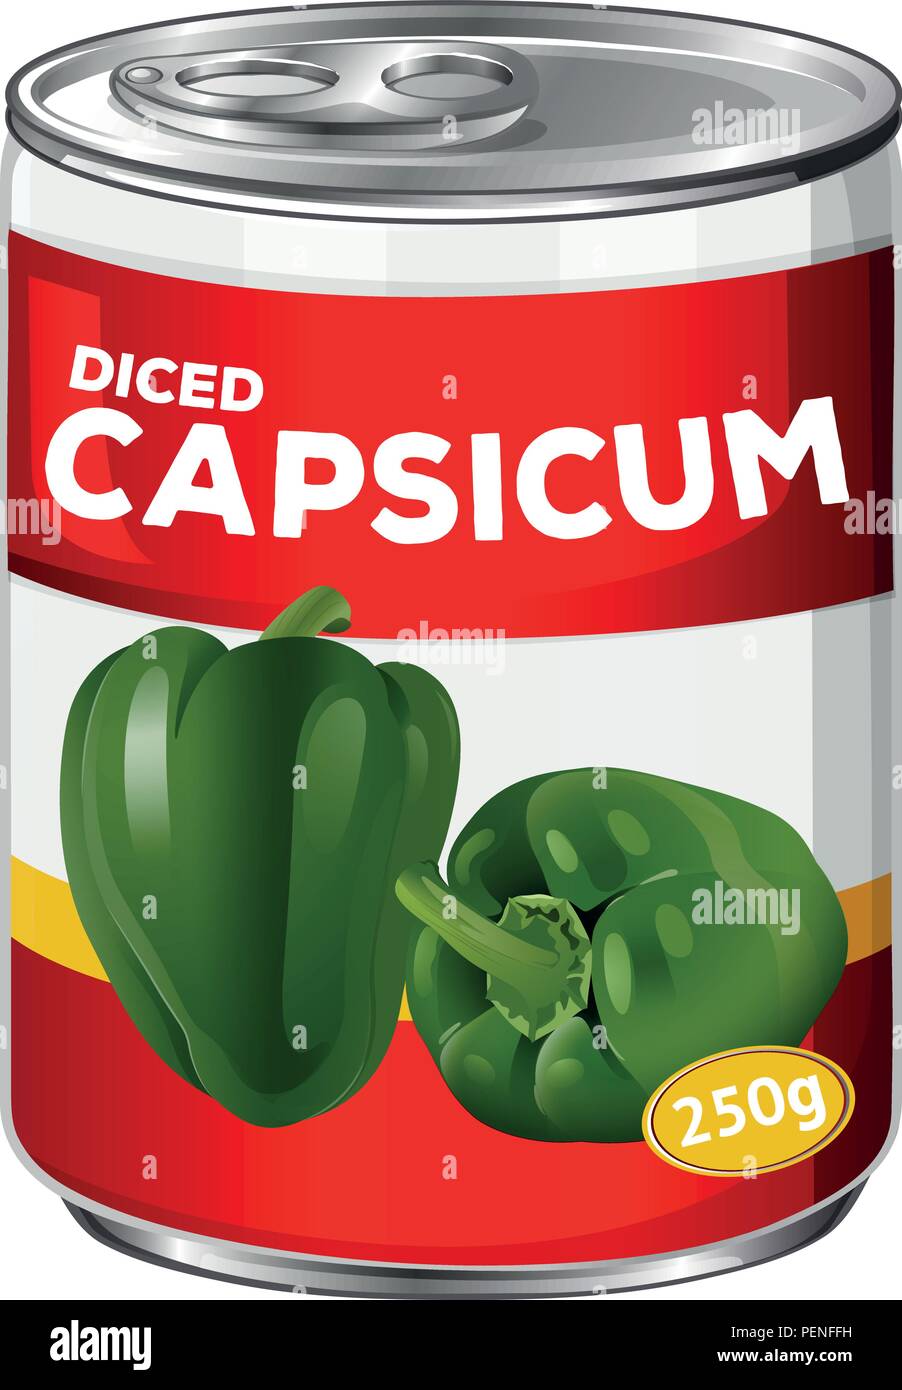 Can of diced capsicum illustration Stock Vector